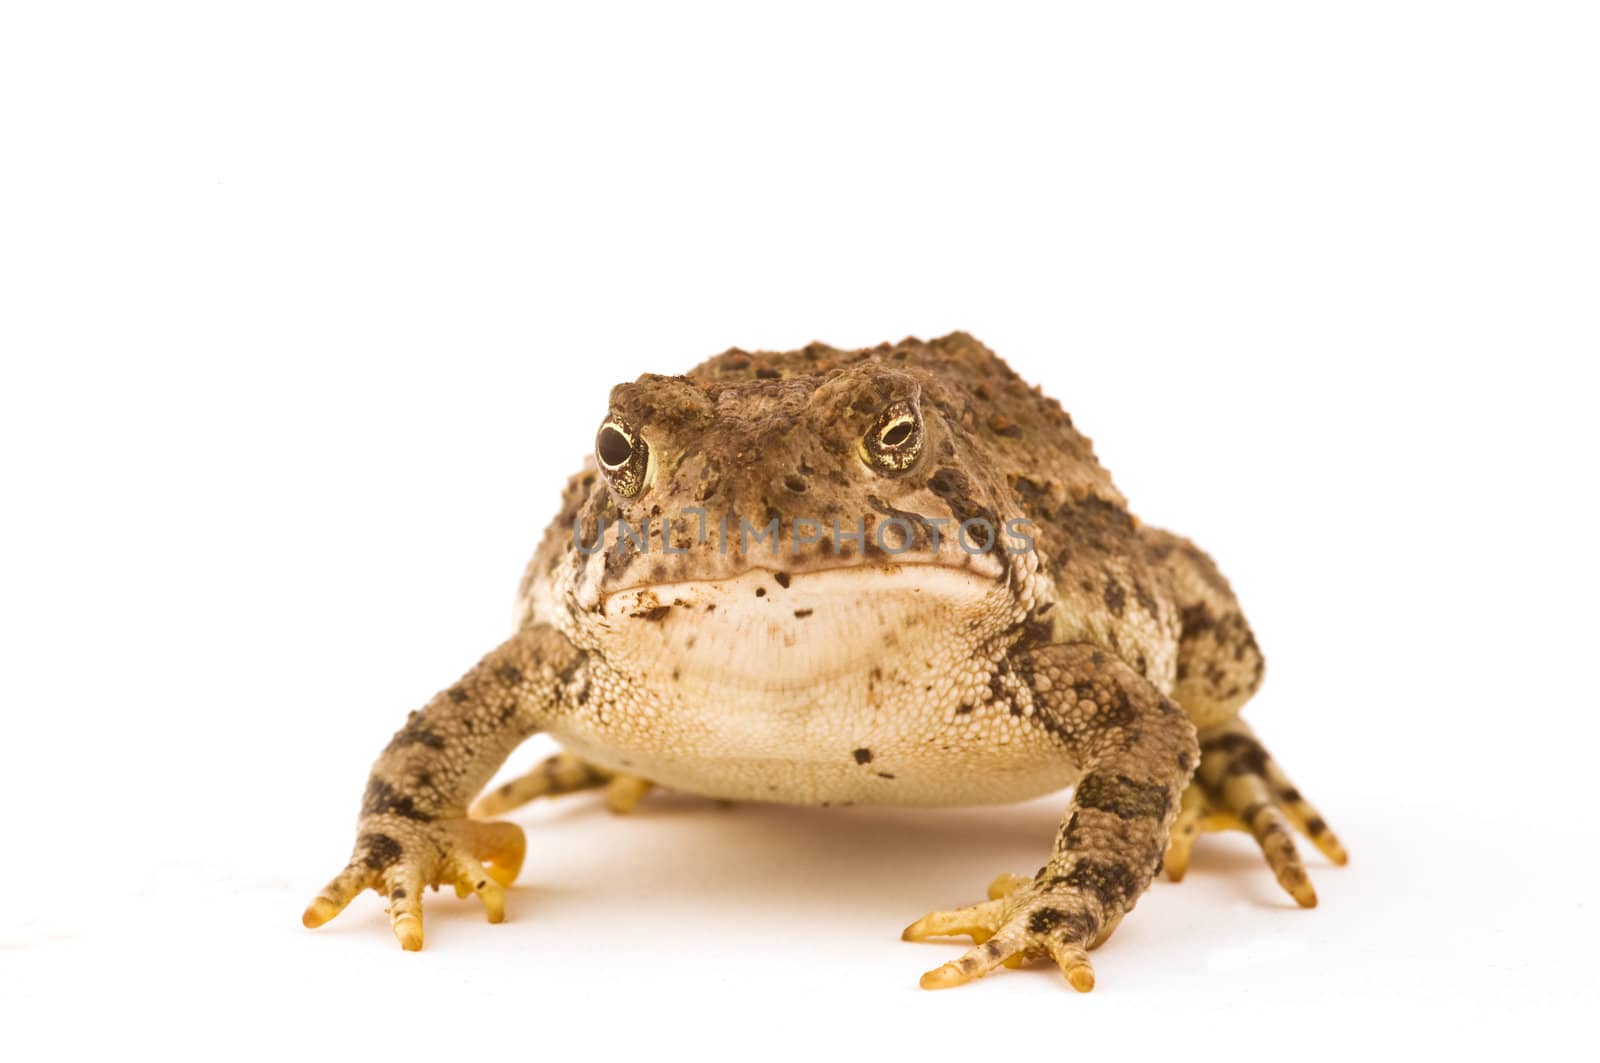 A frog isolated on white background with unequal puples